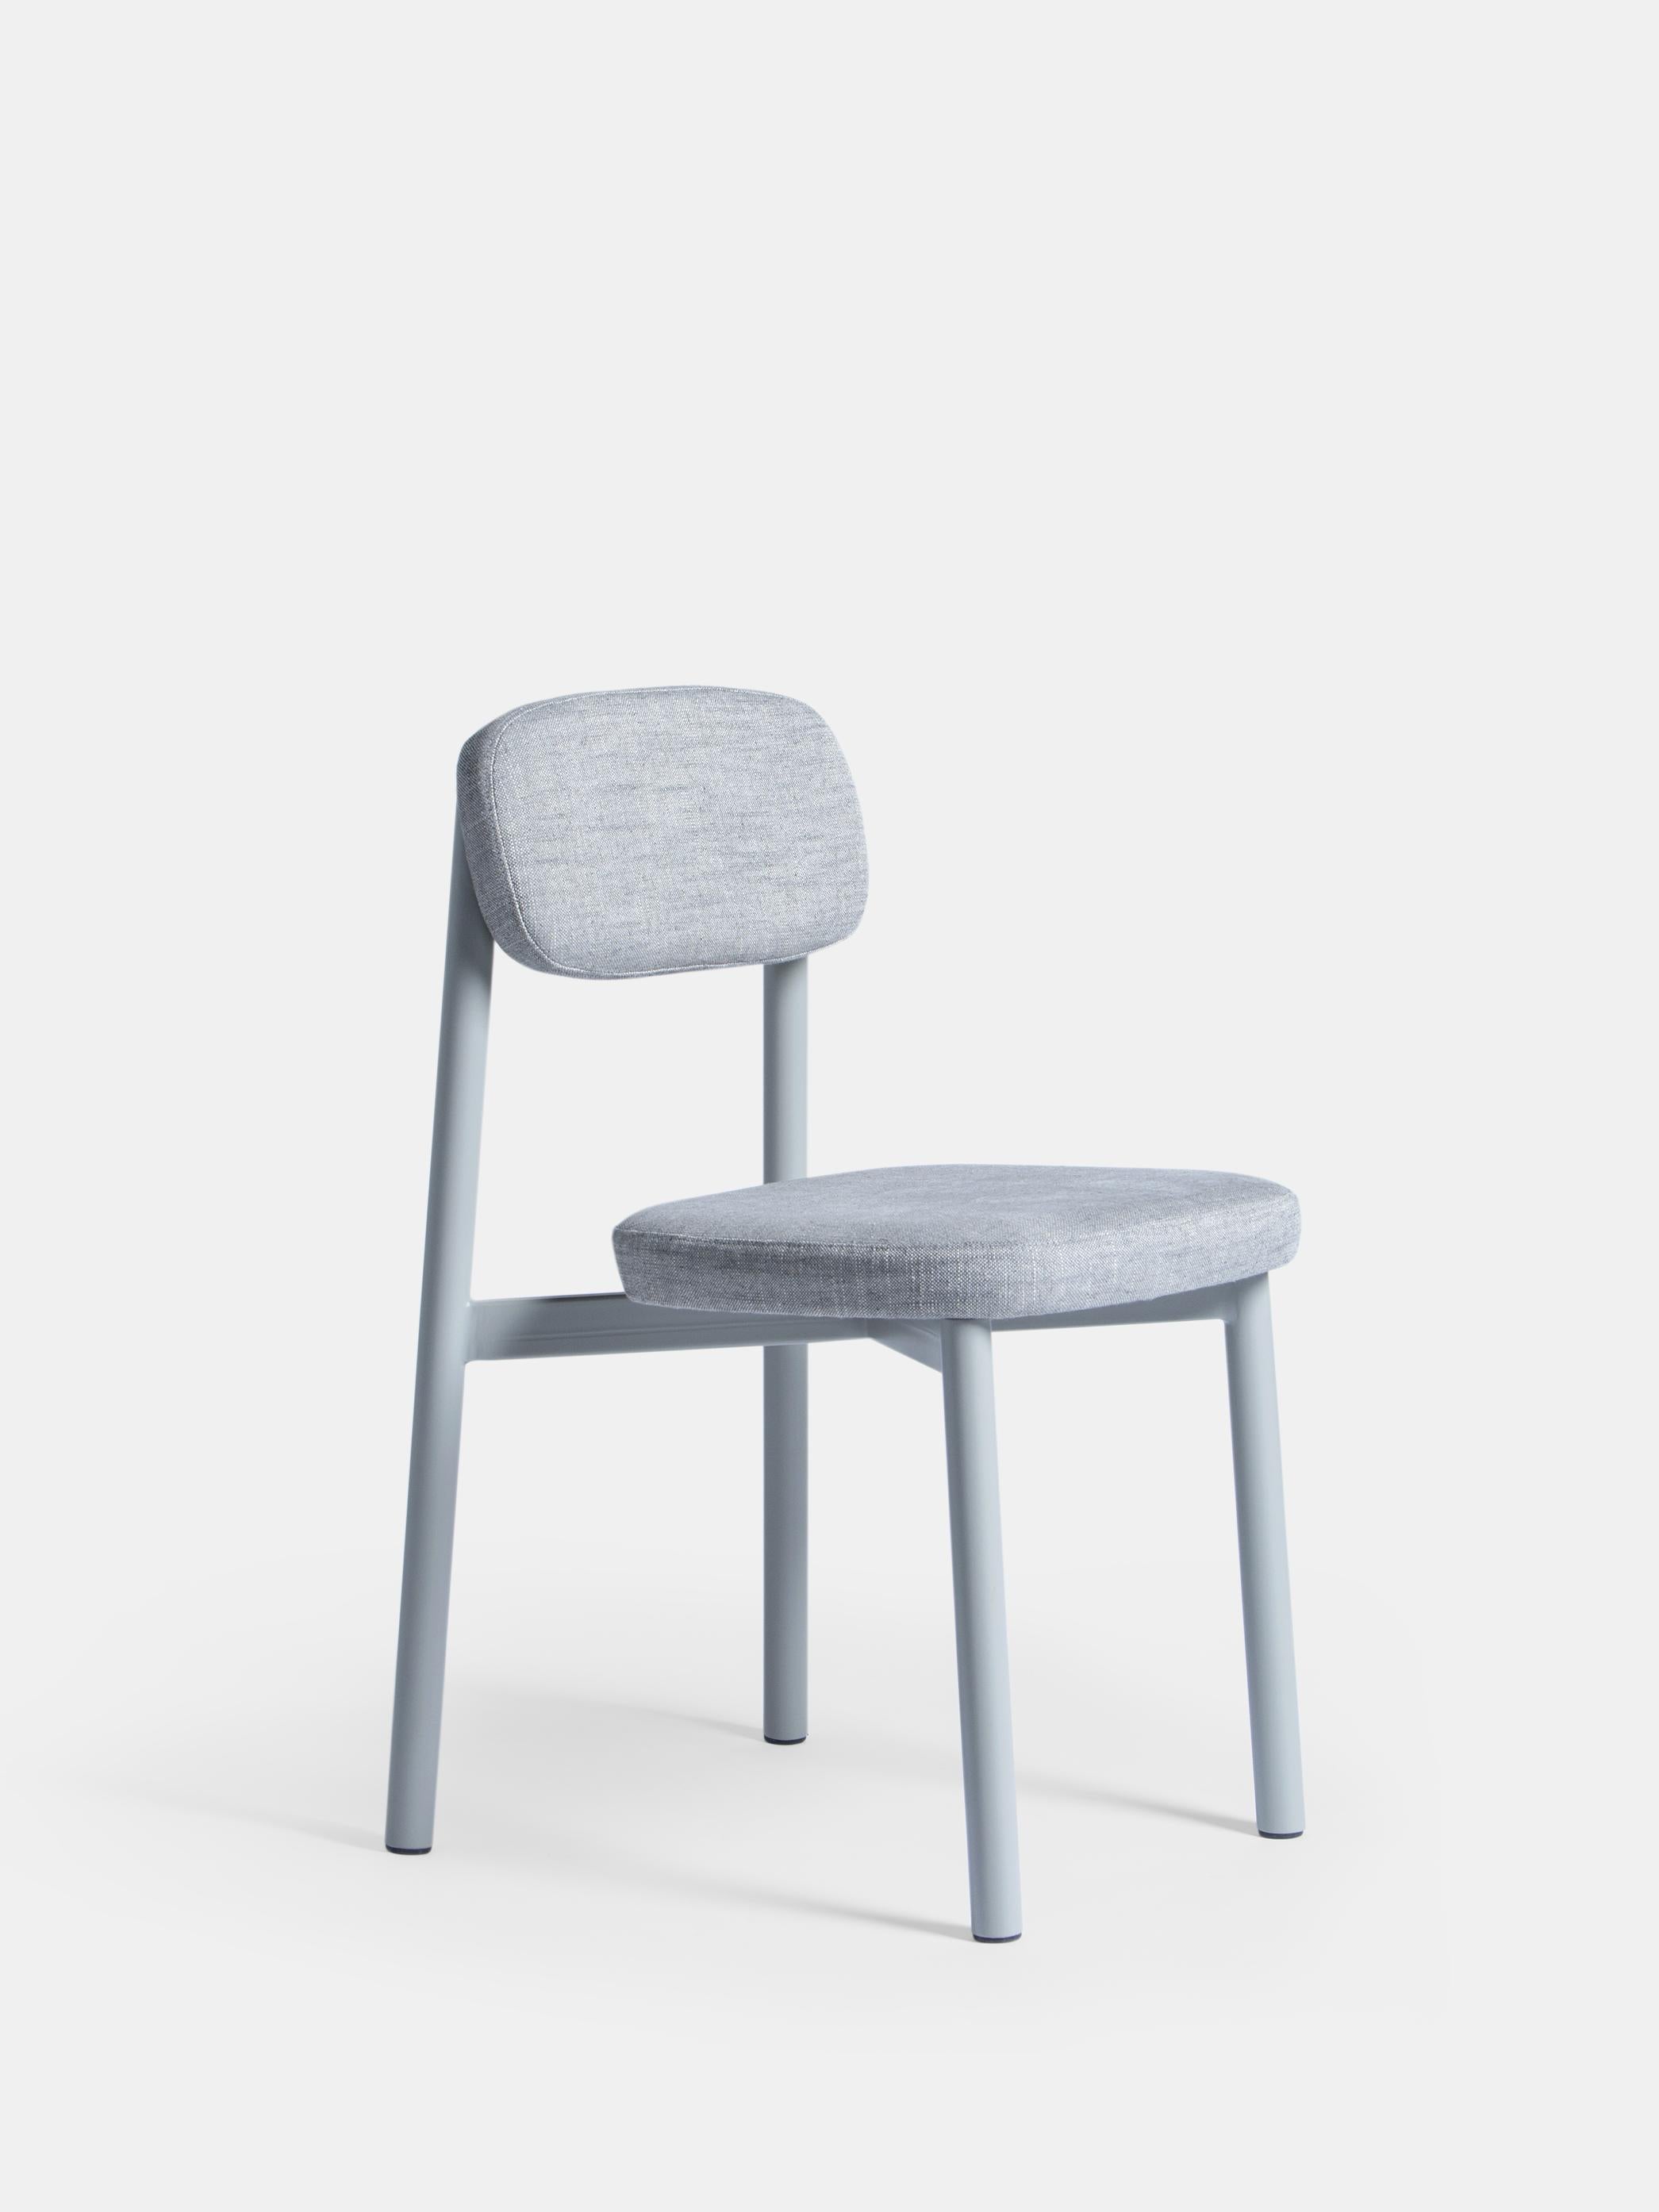 Set of 6 Grey Residence Chairs by Kann Design
Dimensions: D 43 x W 50 x H 77 cm.
Materials: Steel tube, HR foam, fabric upholstery Sahco Ellis 4 (11% viscose, 30 % linen).
Available in other colors.

All of the Residence seats were created by